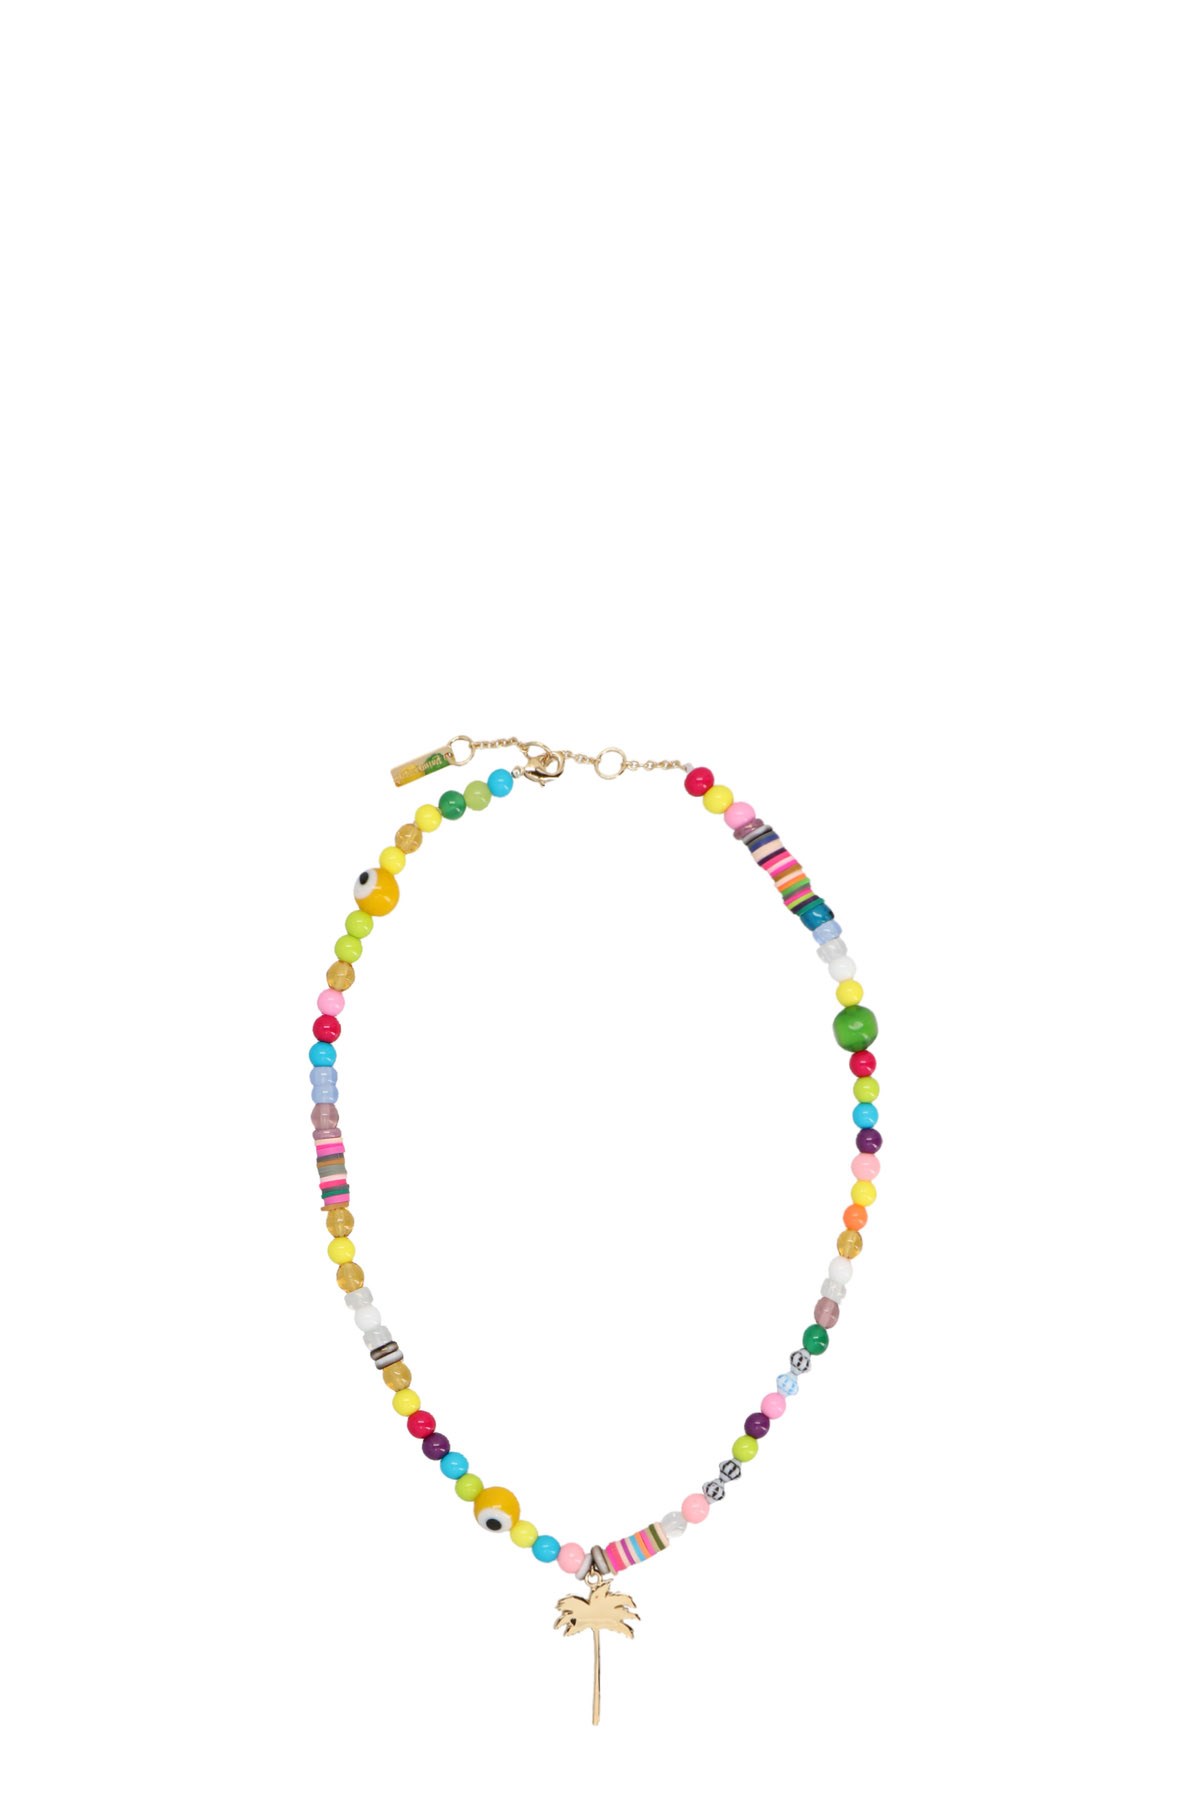 PALM ANGELS 'Palm Rainbow’ Necklace